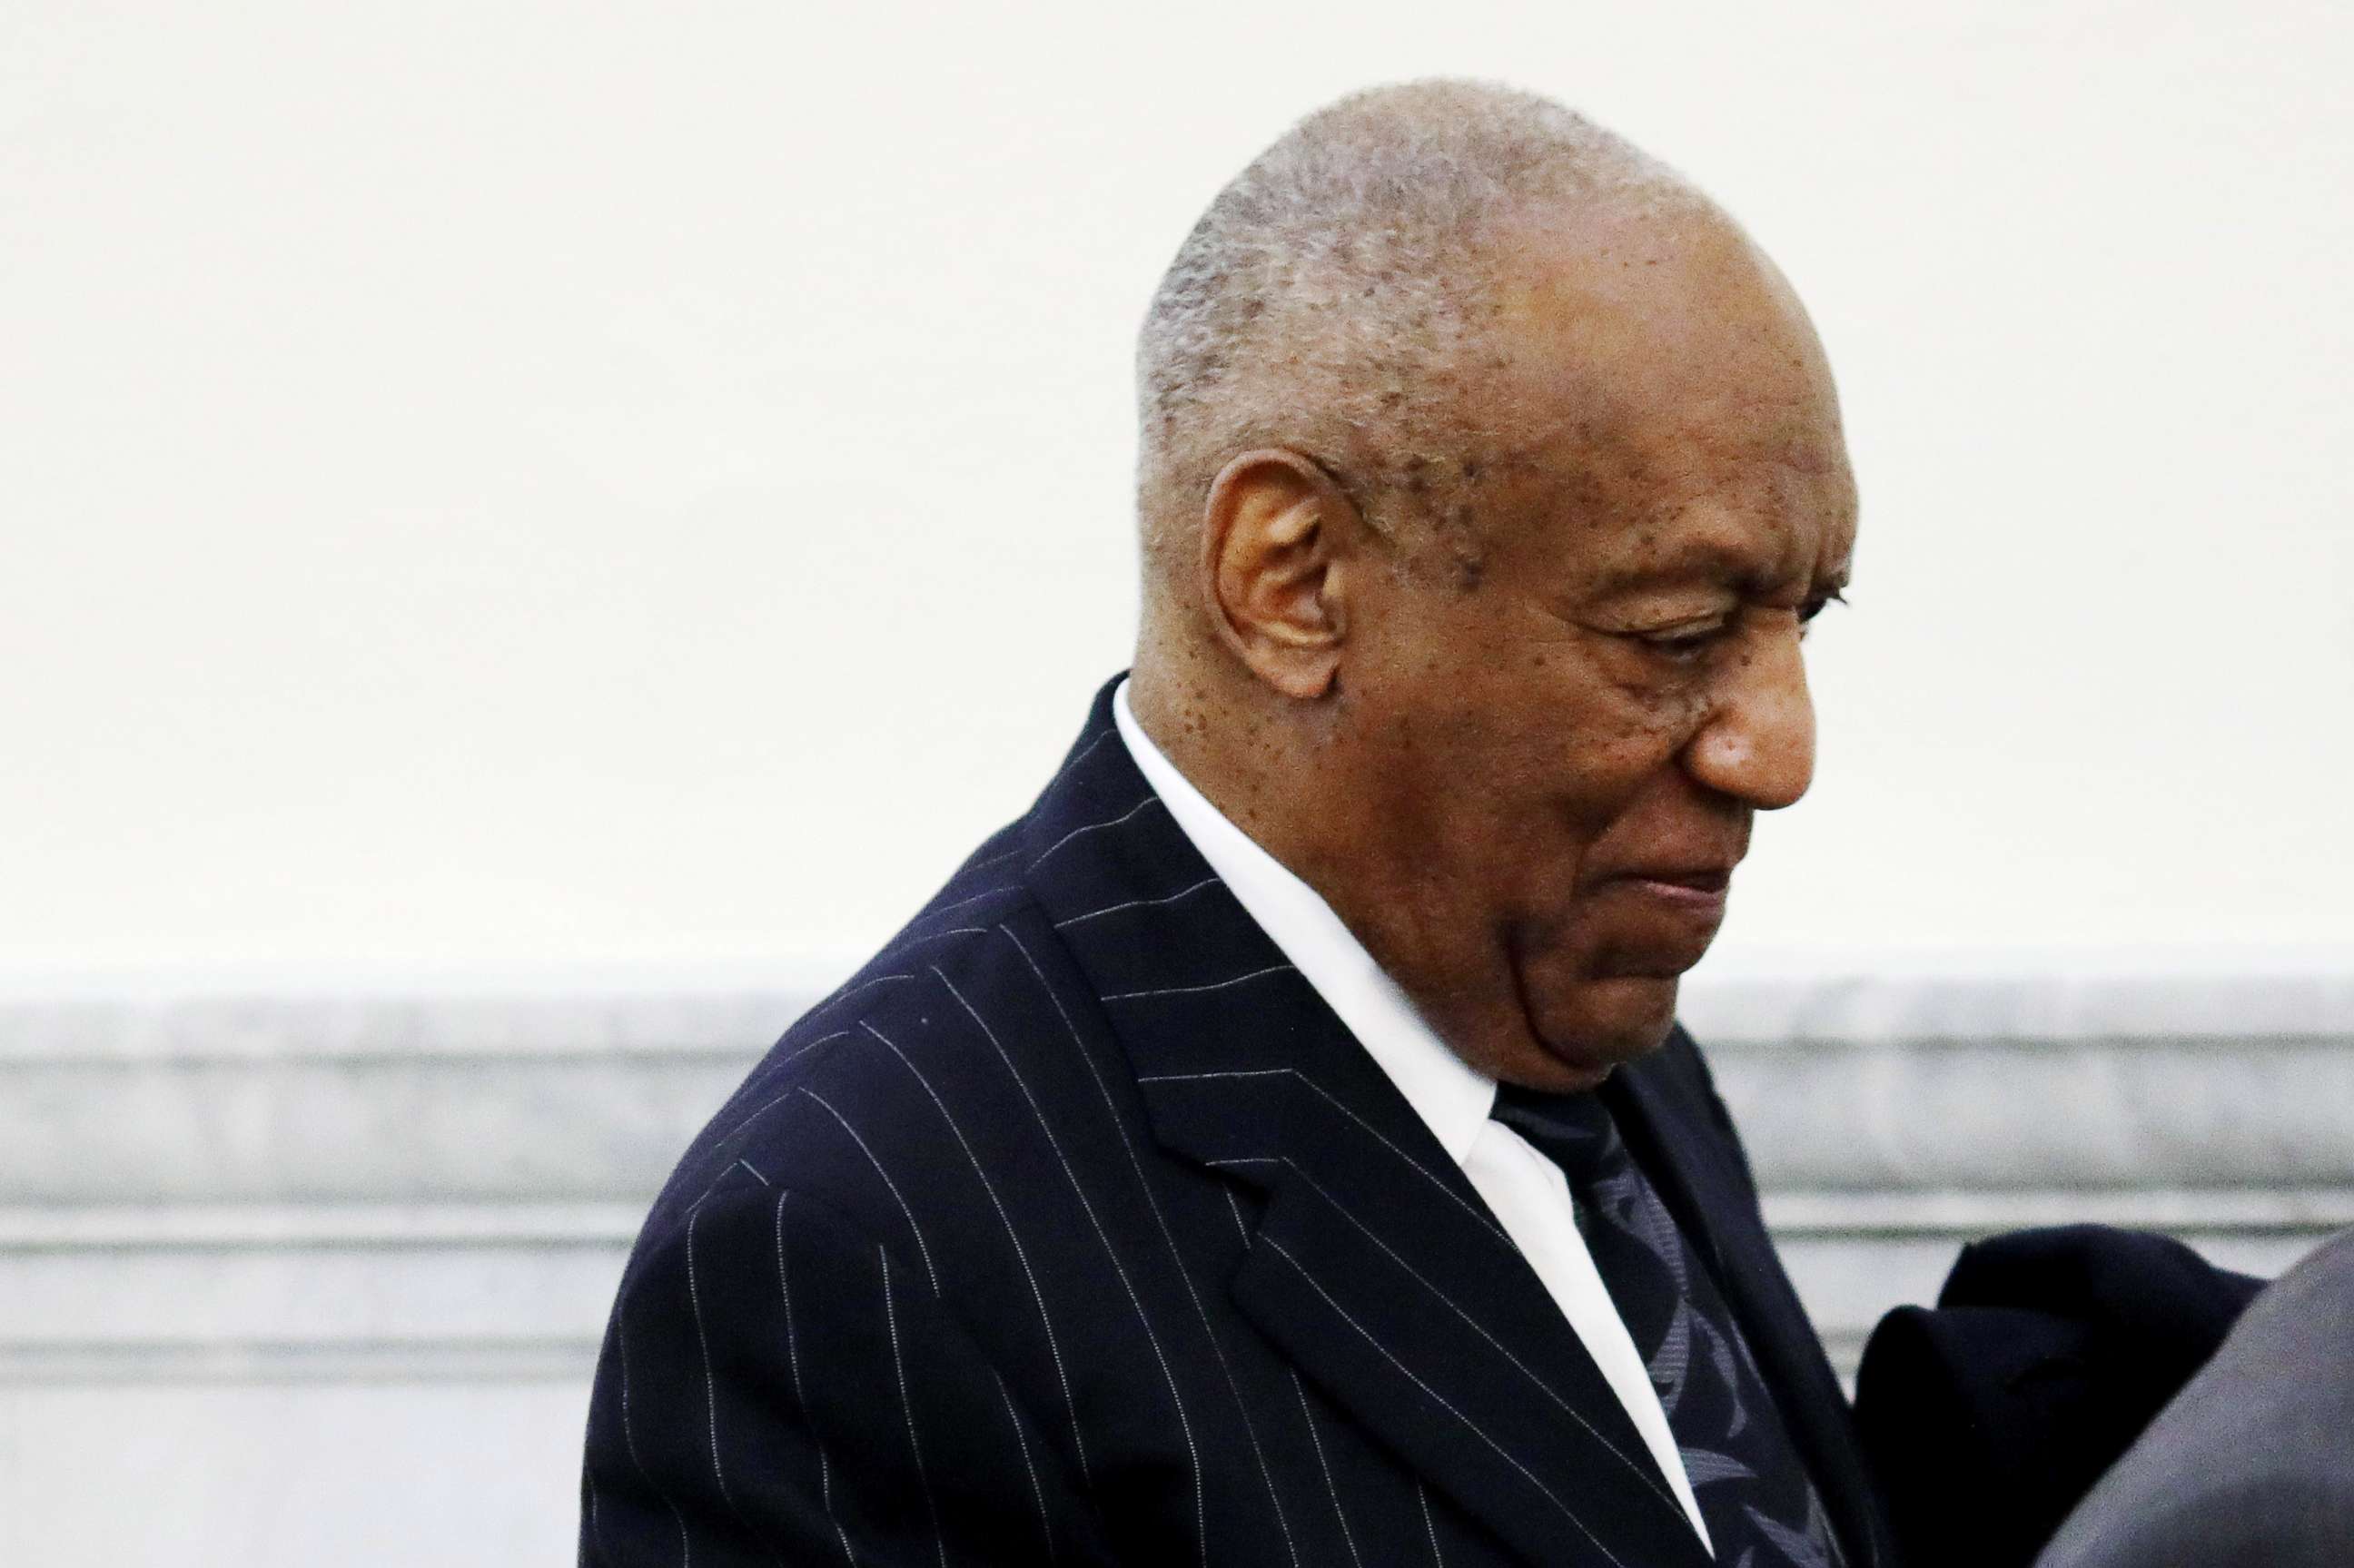 PHOTO: Bill Cosby leaves the courtroom for lunch as his sexual assault case enters the third day at the Montgomery County Courthouse, April 11, 2018, in Norristown, Penn.